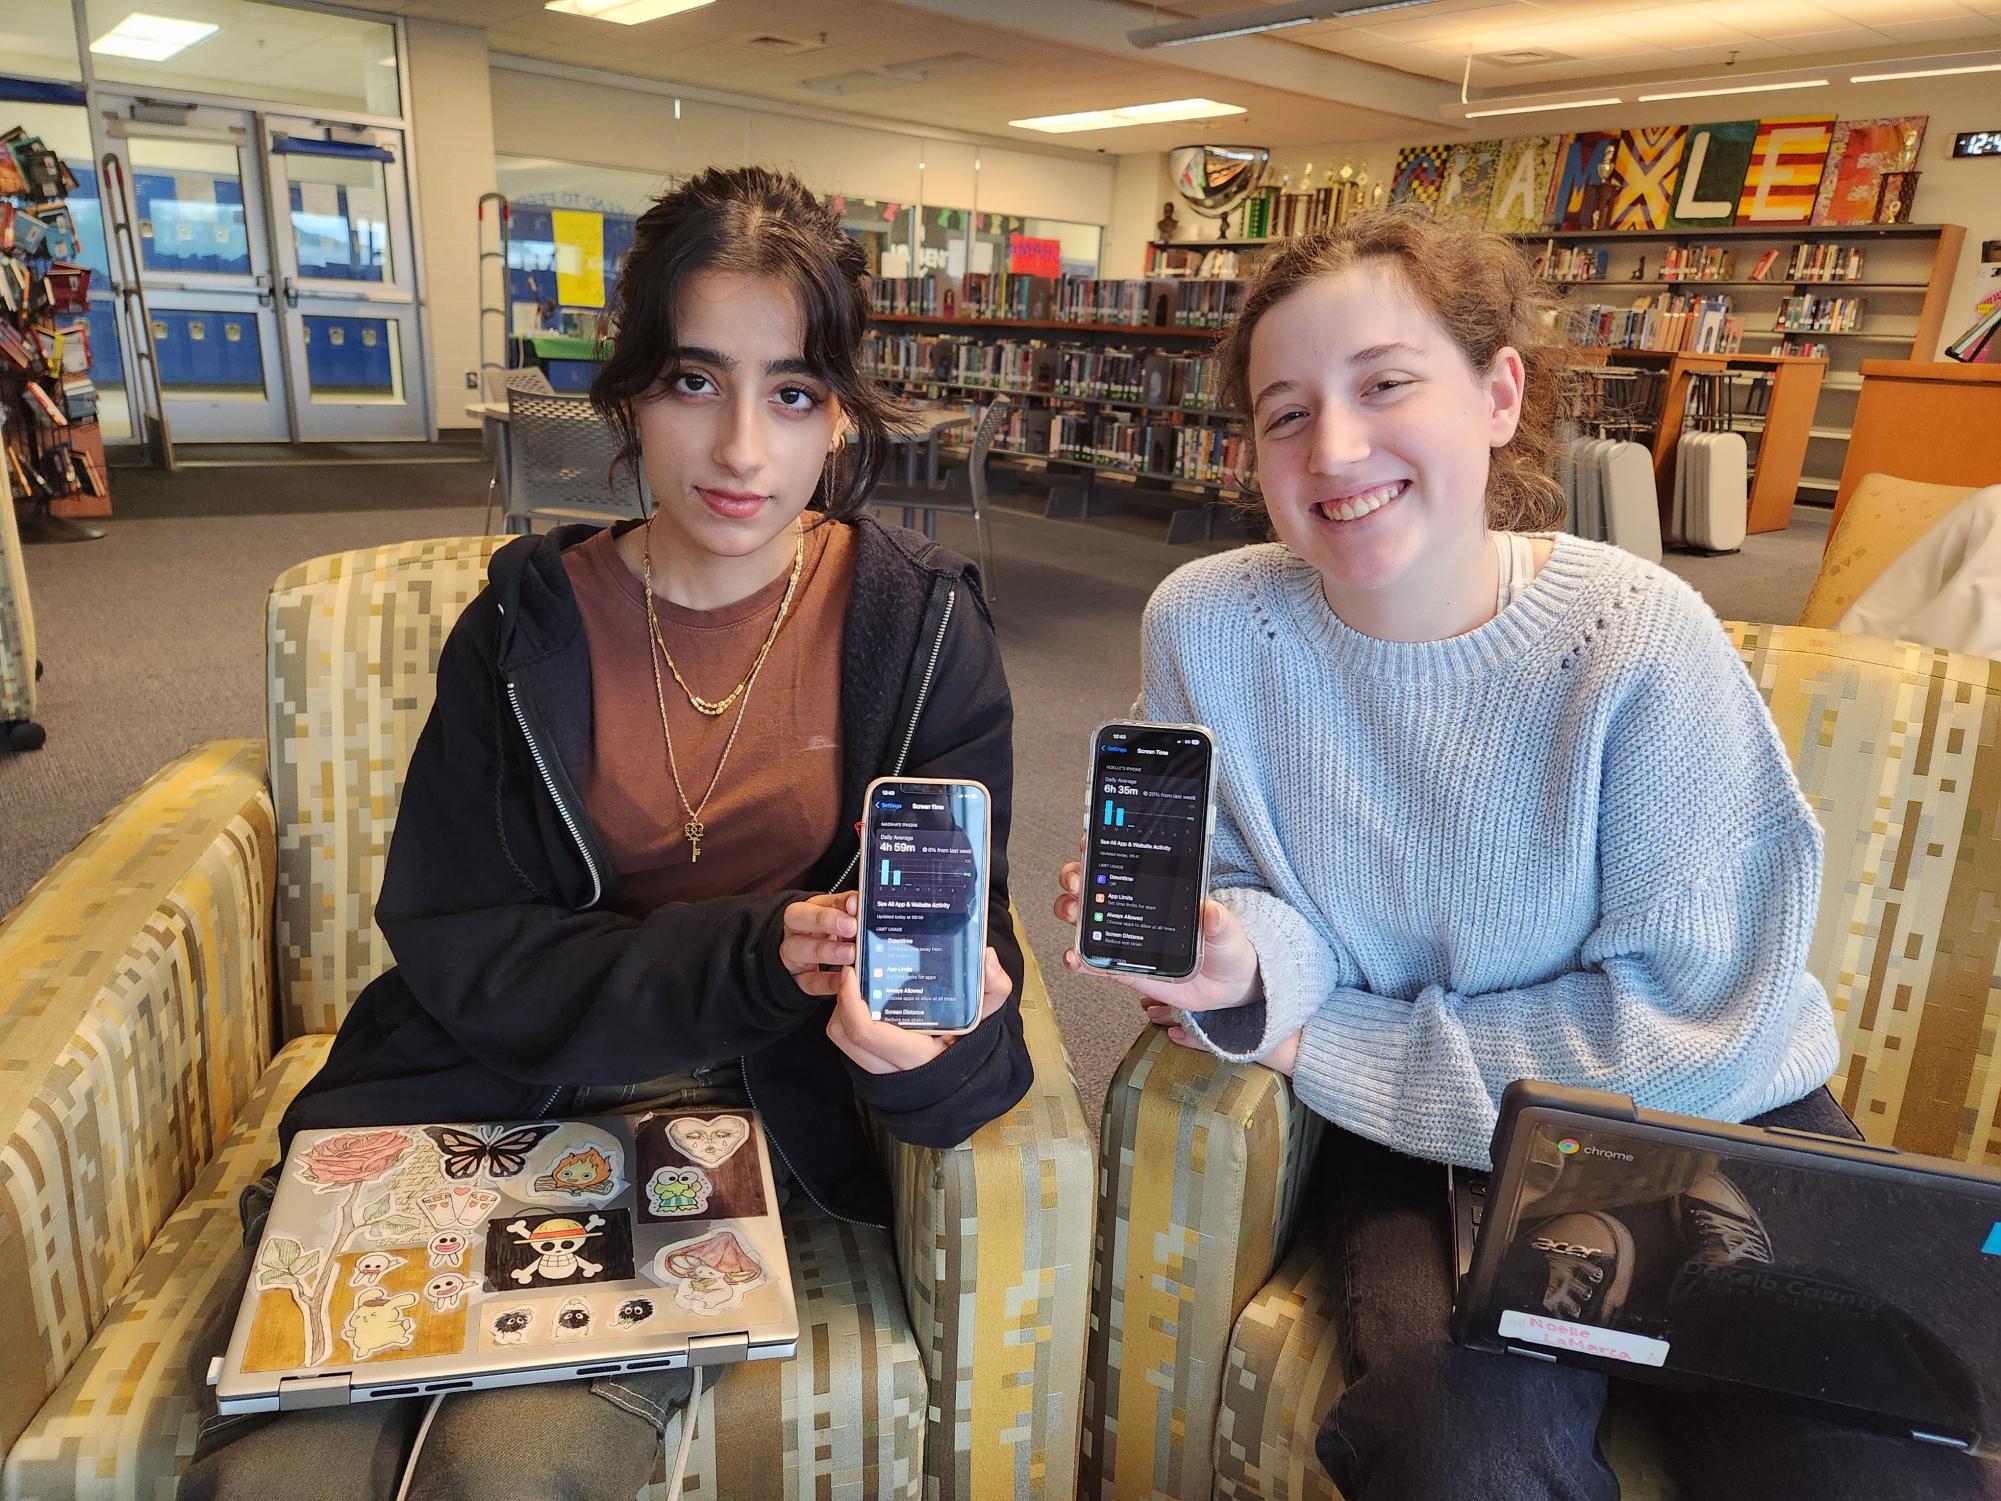 Students Madiha Sayeed and Noelle LaMarca showing their screen time.